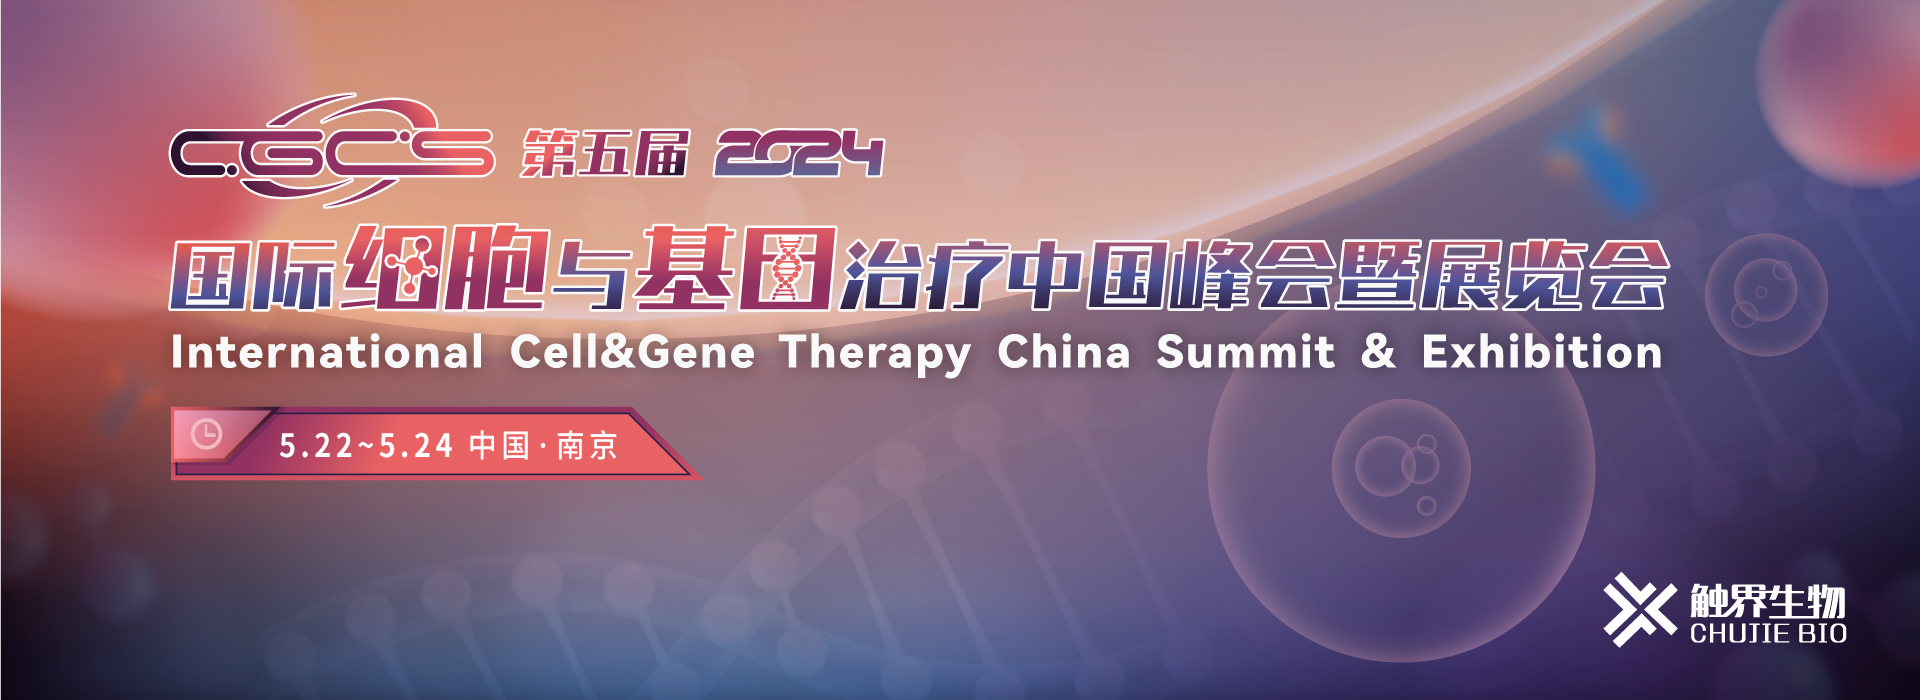 The 5th International Cell & Gene Therapy China Summit & Exhibition